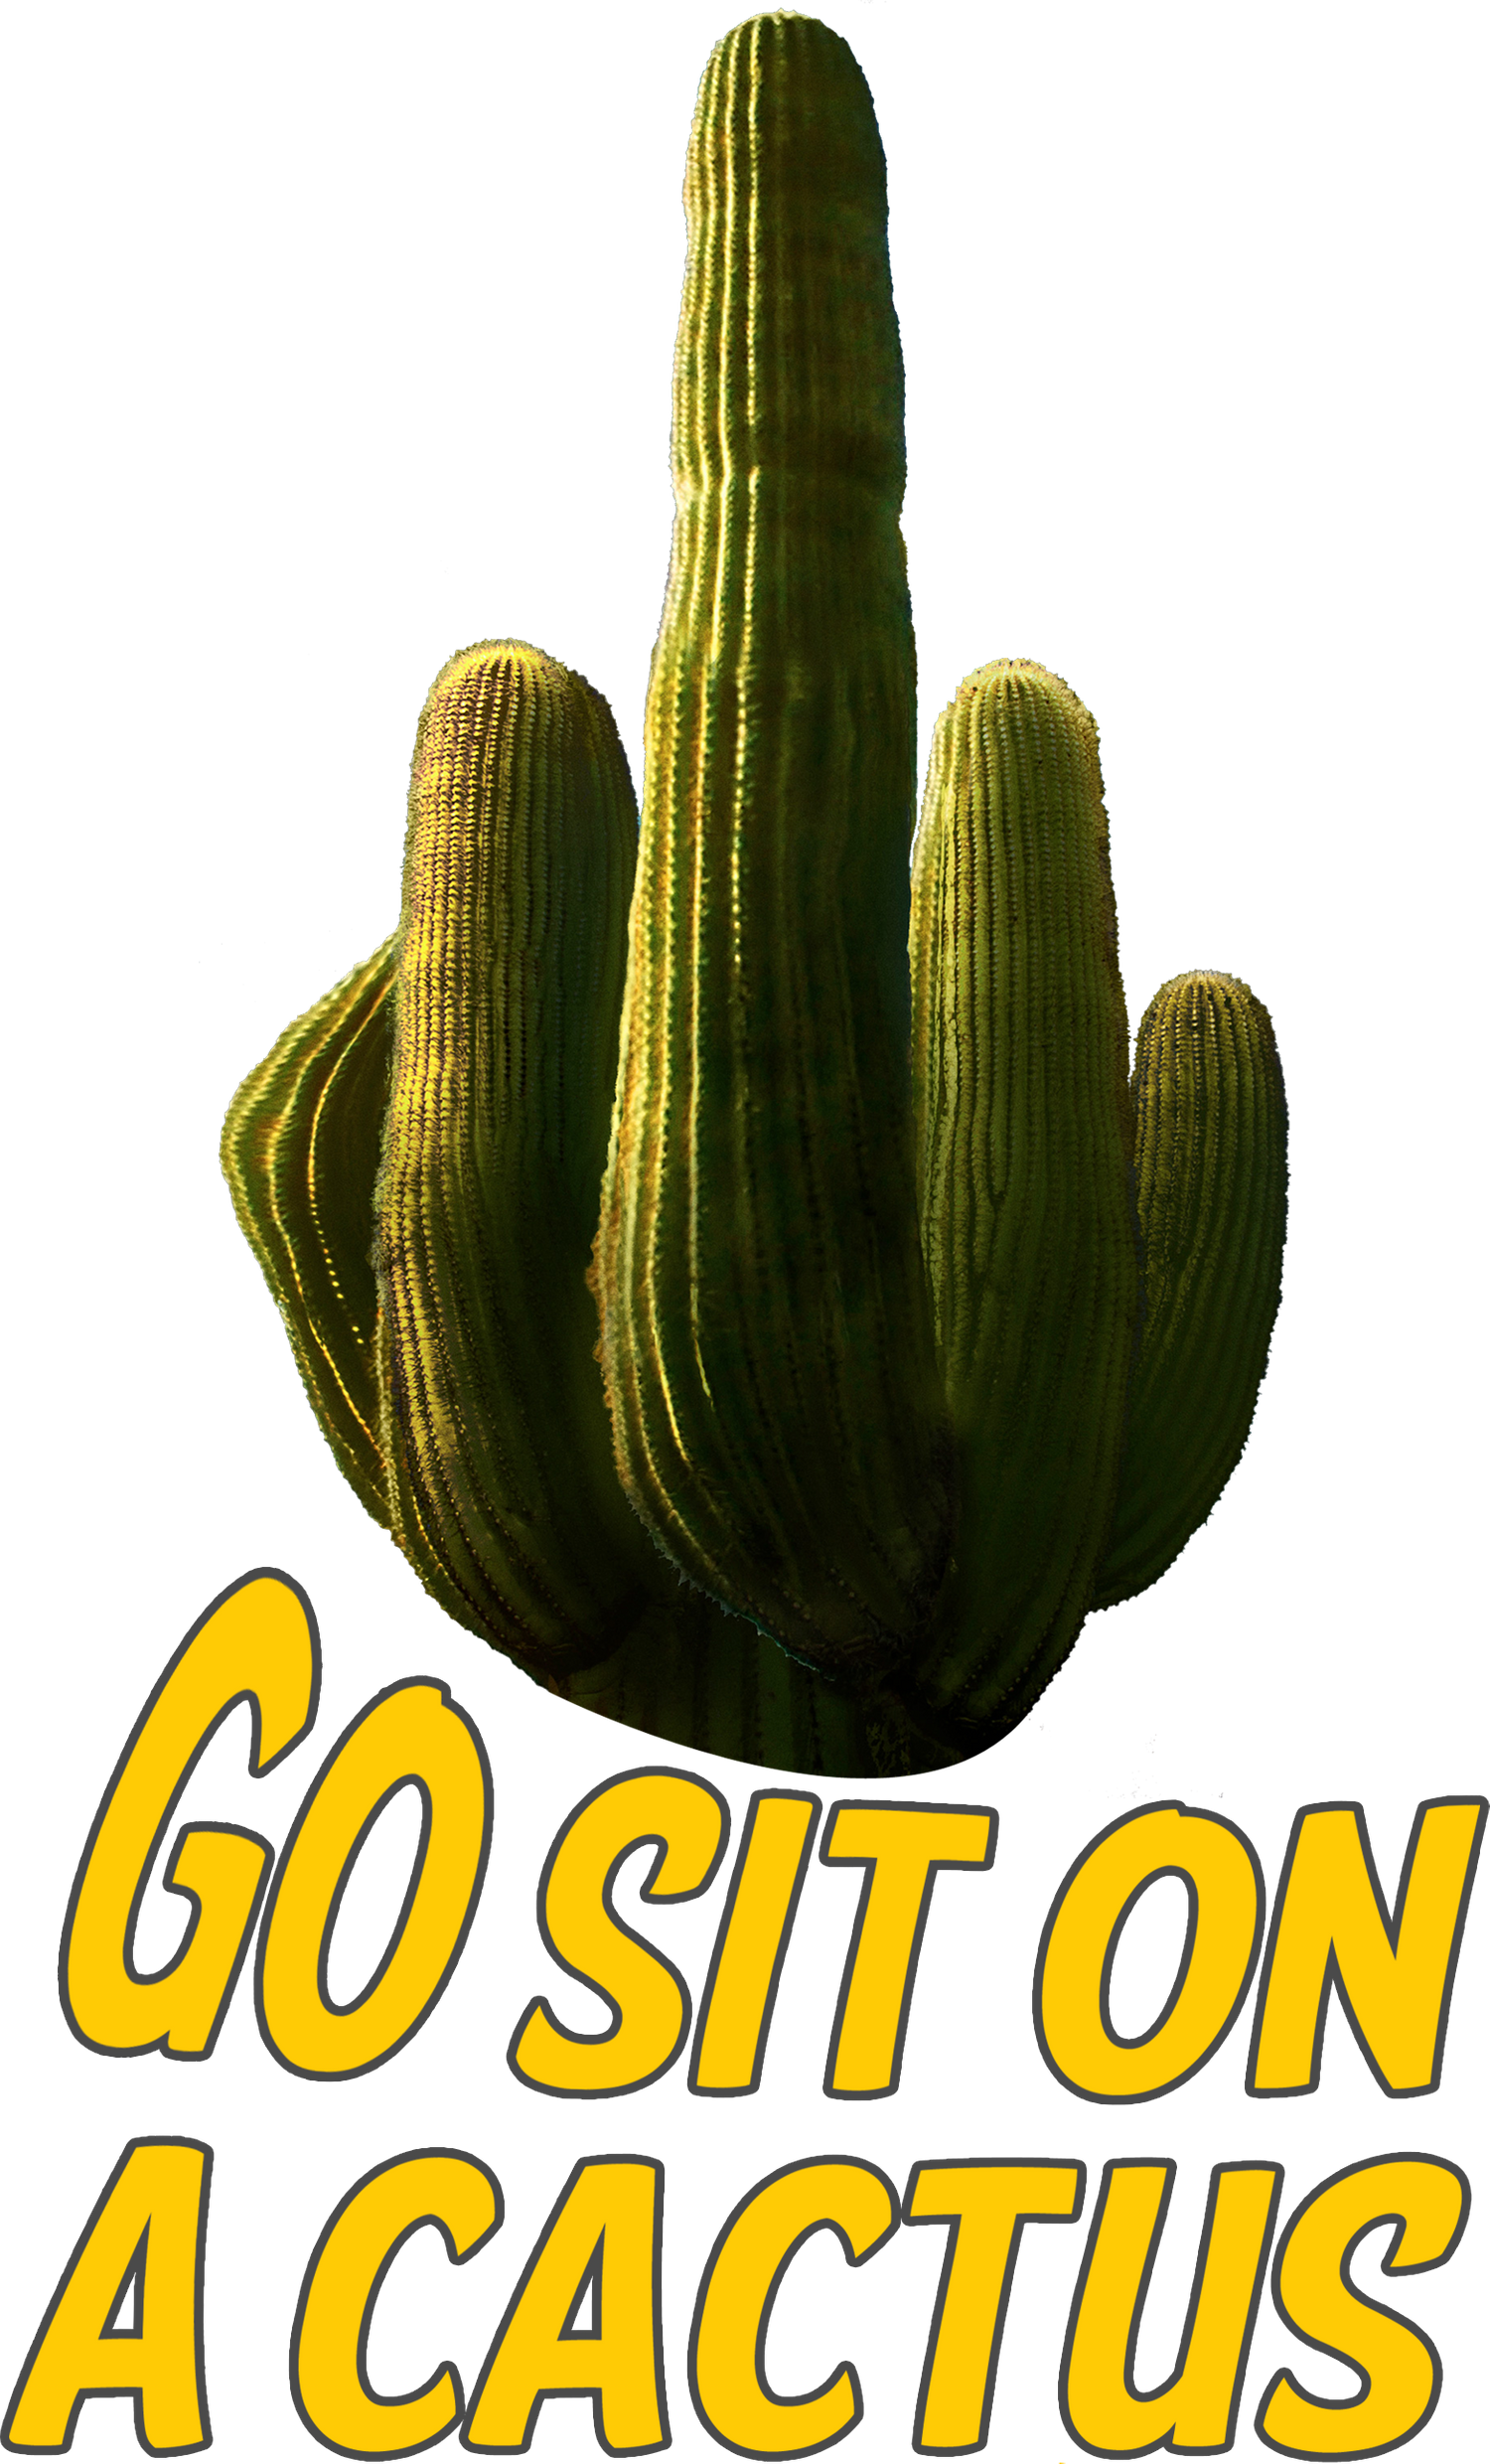 GO SIT ON A CACTUS T-SHIRT | Yellowbullet Forum Store